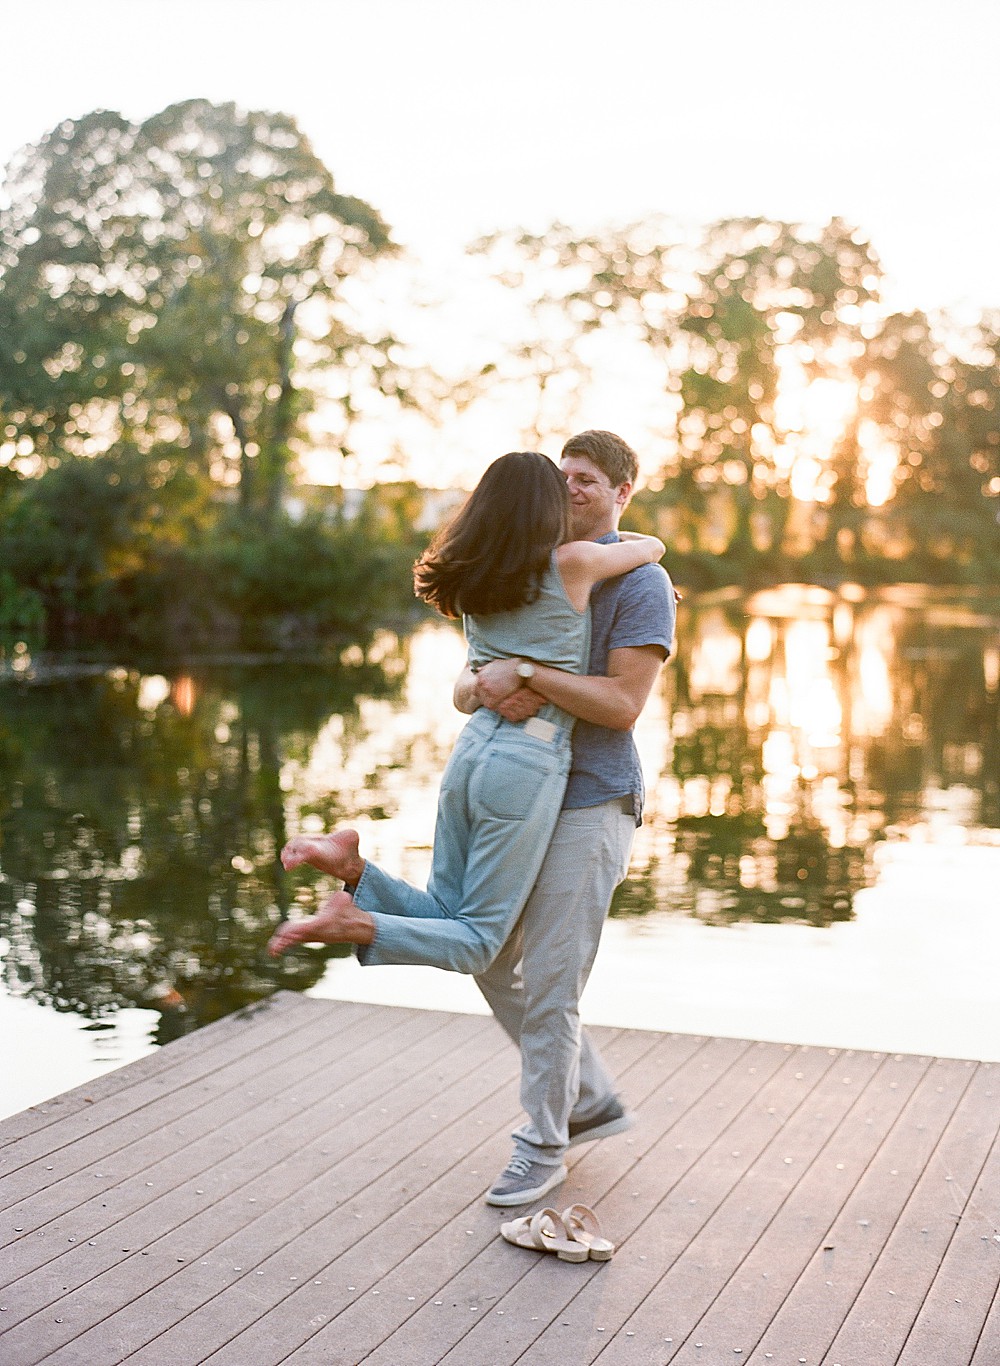 Couple doing The Notebook kiss at Brick Pond dock